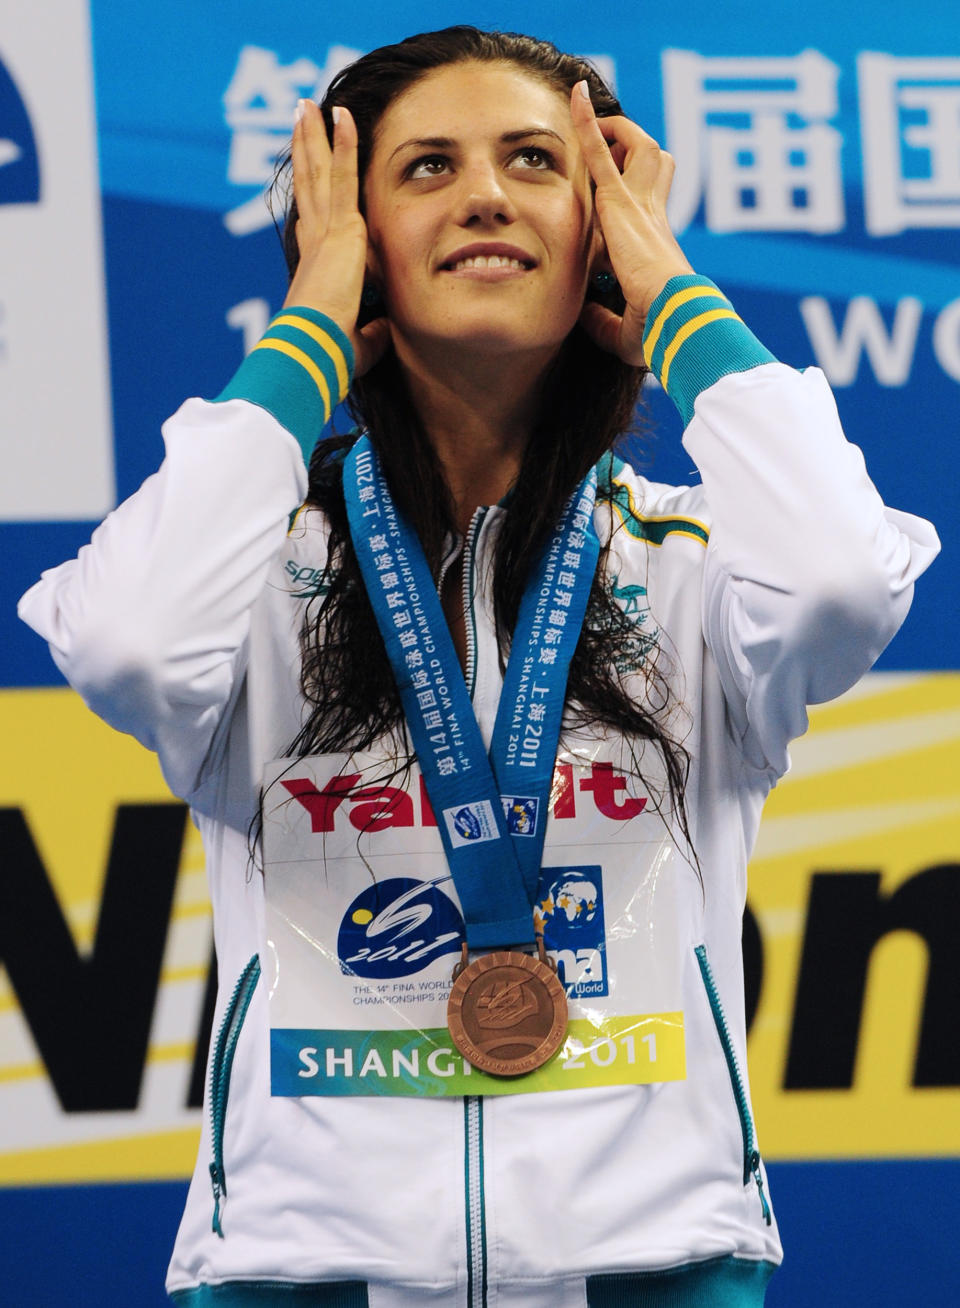 Australia's bronze medalist Stephanie Rice smiles on the podium during the award ceremony for the final of the men's 400-meter individual medley swimming event in the FINA World Championships at the indoor stadium of the Oriental Sports Center in Shanghai on July 31, 2011. (MARK RALSTON/AFP/Getty Images)